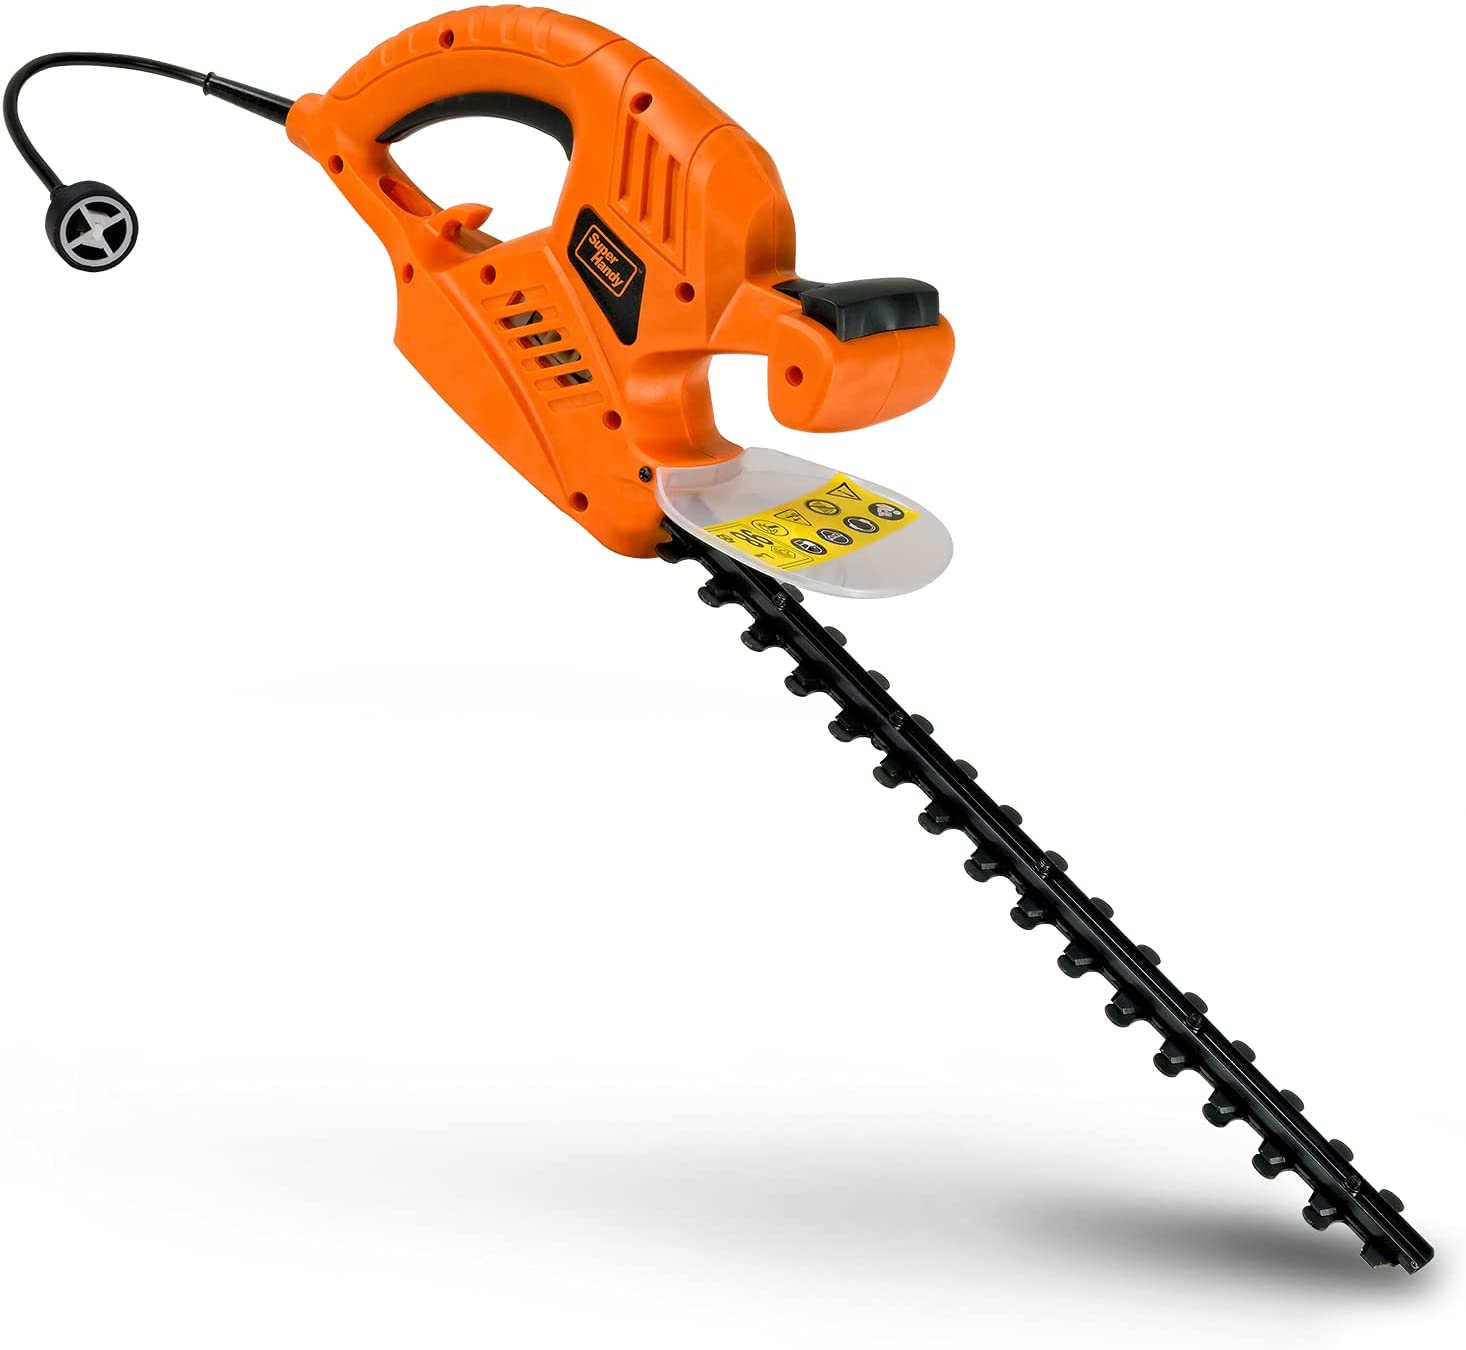 SuperHandy Hedge Trimmer 610mm 600W Corded 230V Lightweight Lawn and Garden Landscaping - Great Circle UK 